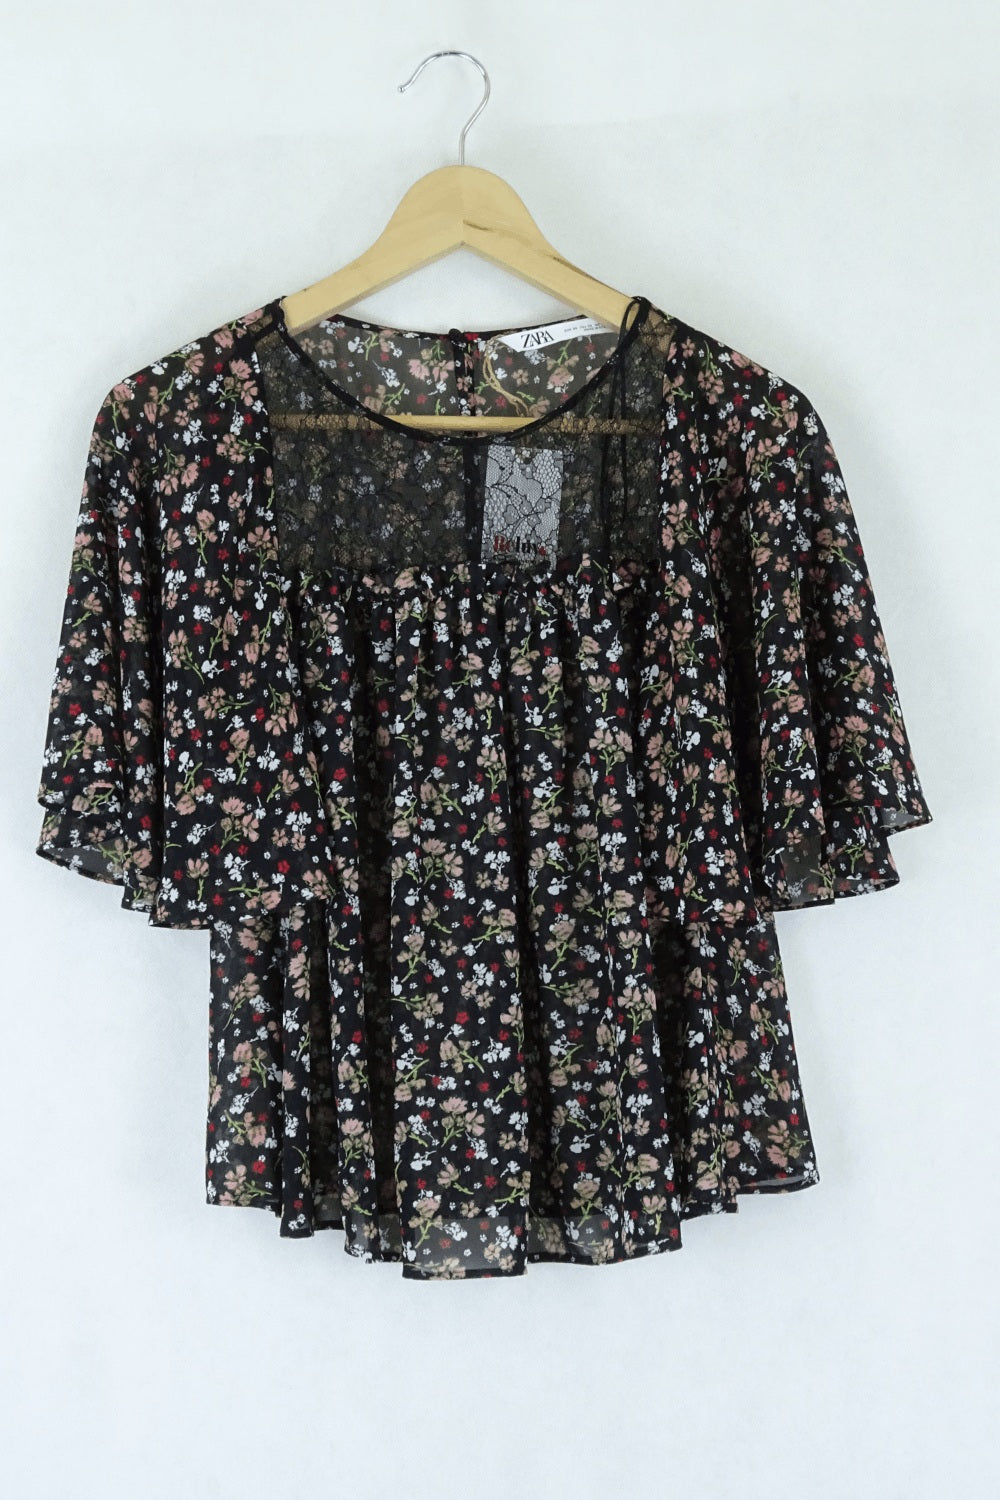 Zara Black and Floral Blouse XS